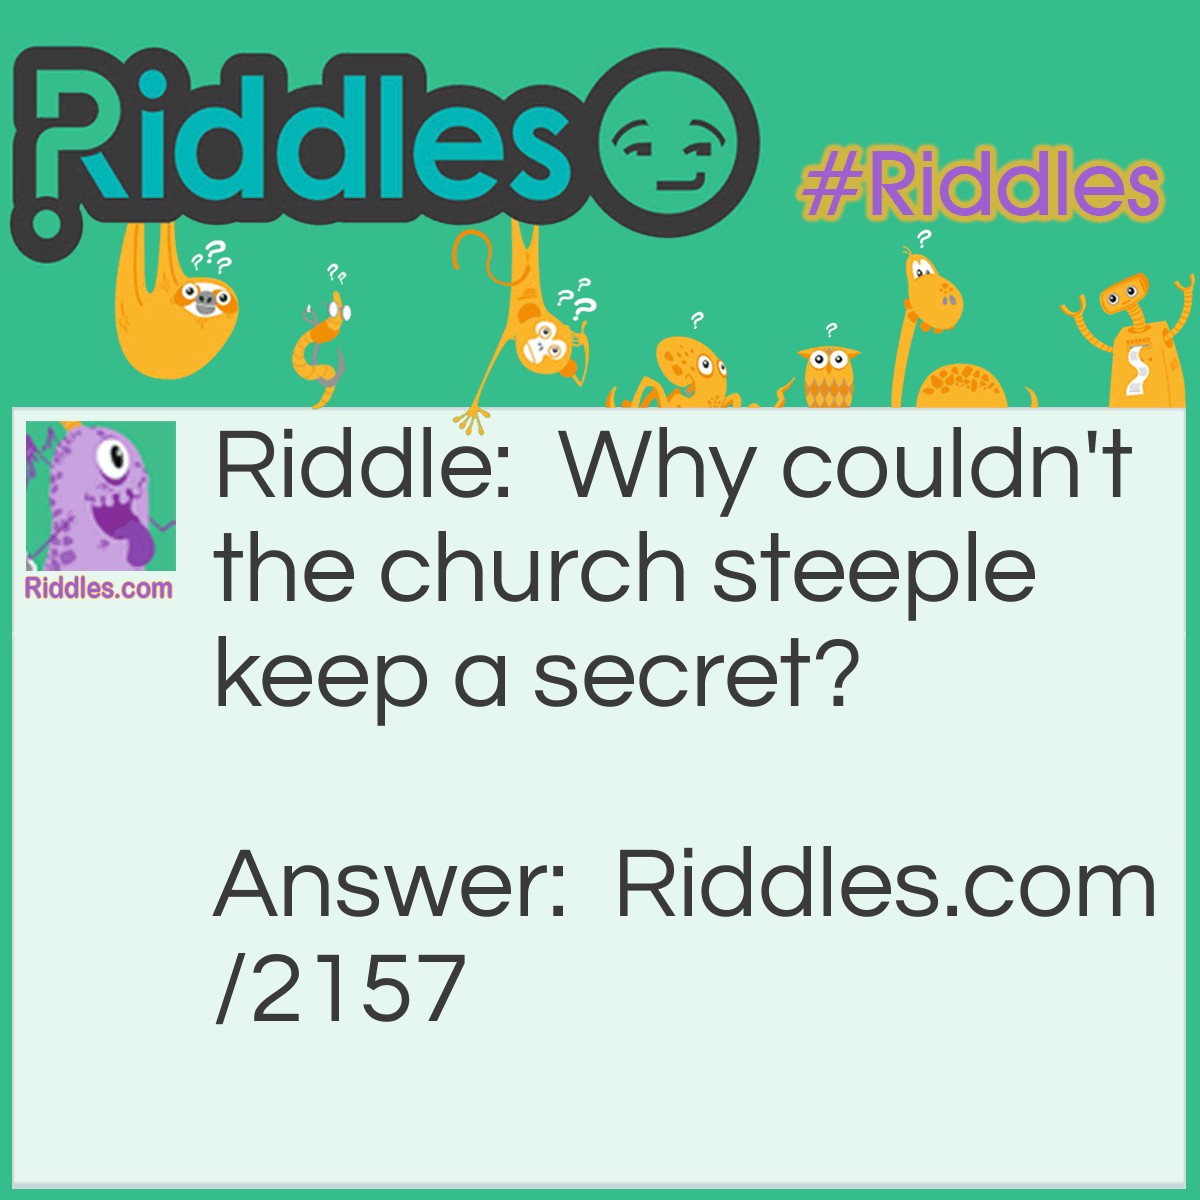 Riddle: Why couldn't the church steeple keep a secret? Answer: Because the bell always tolled.